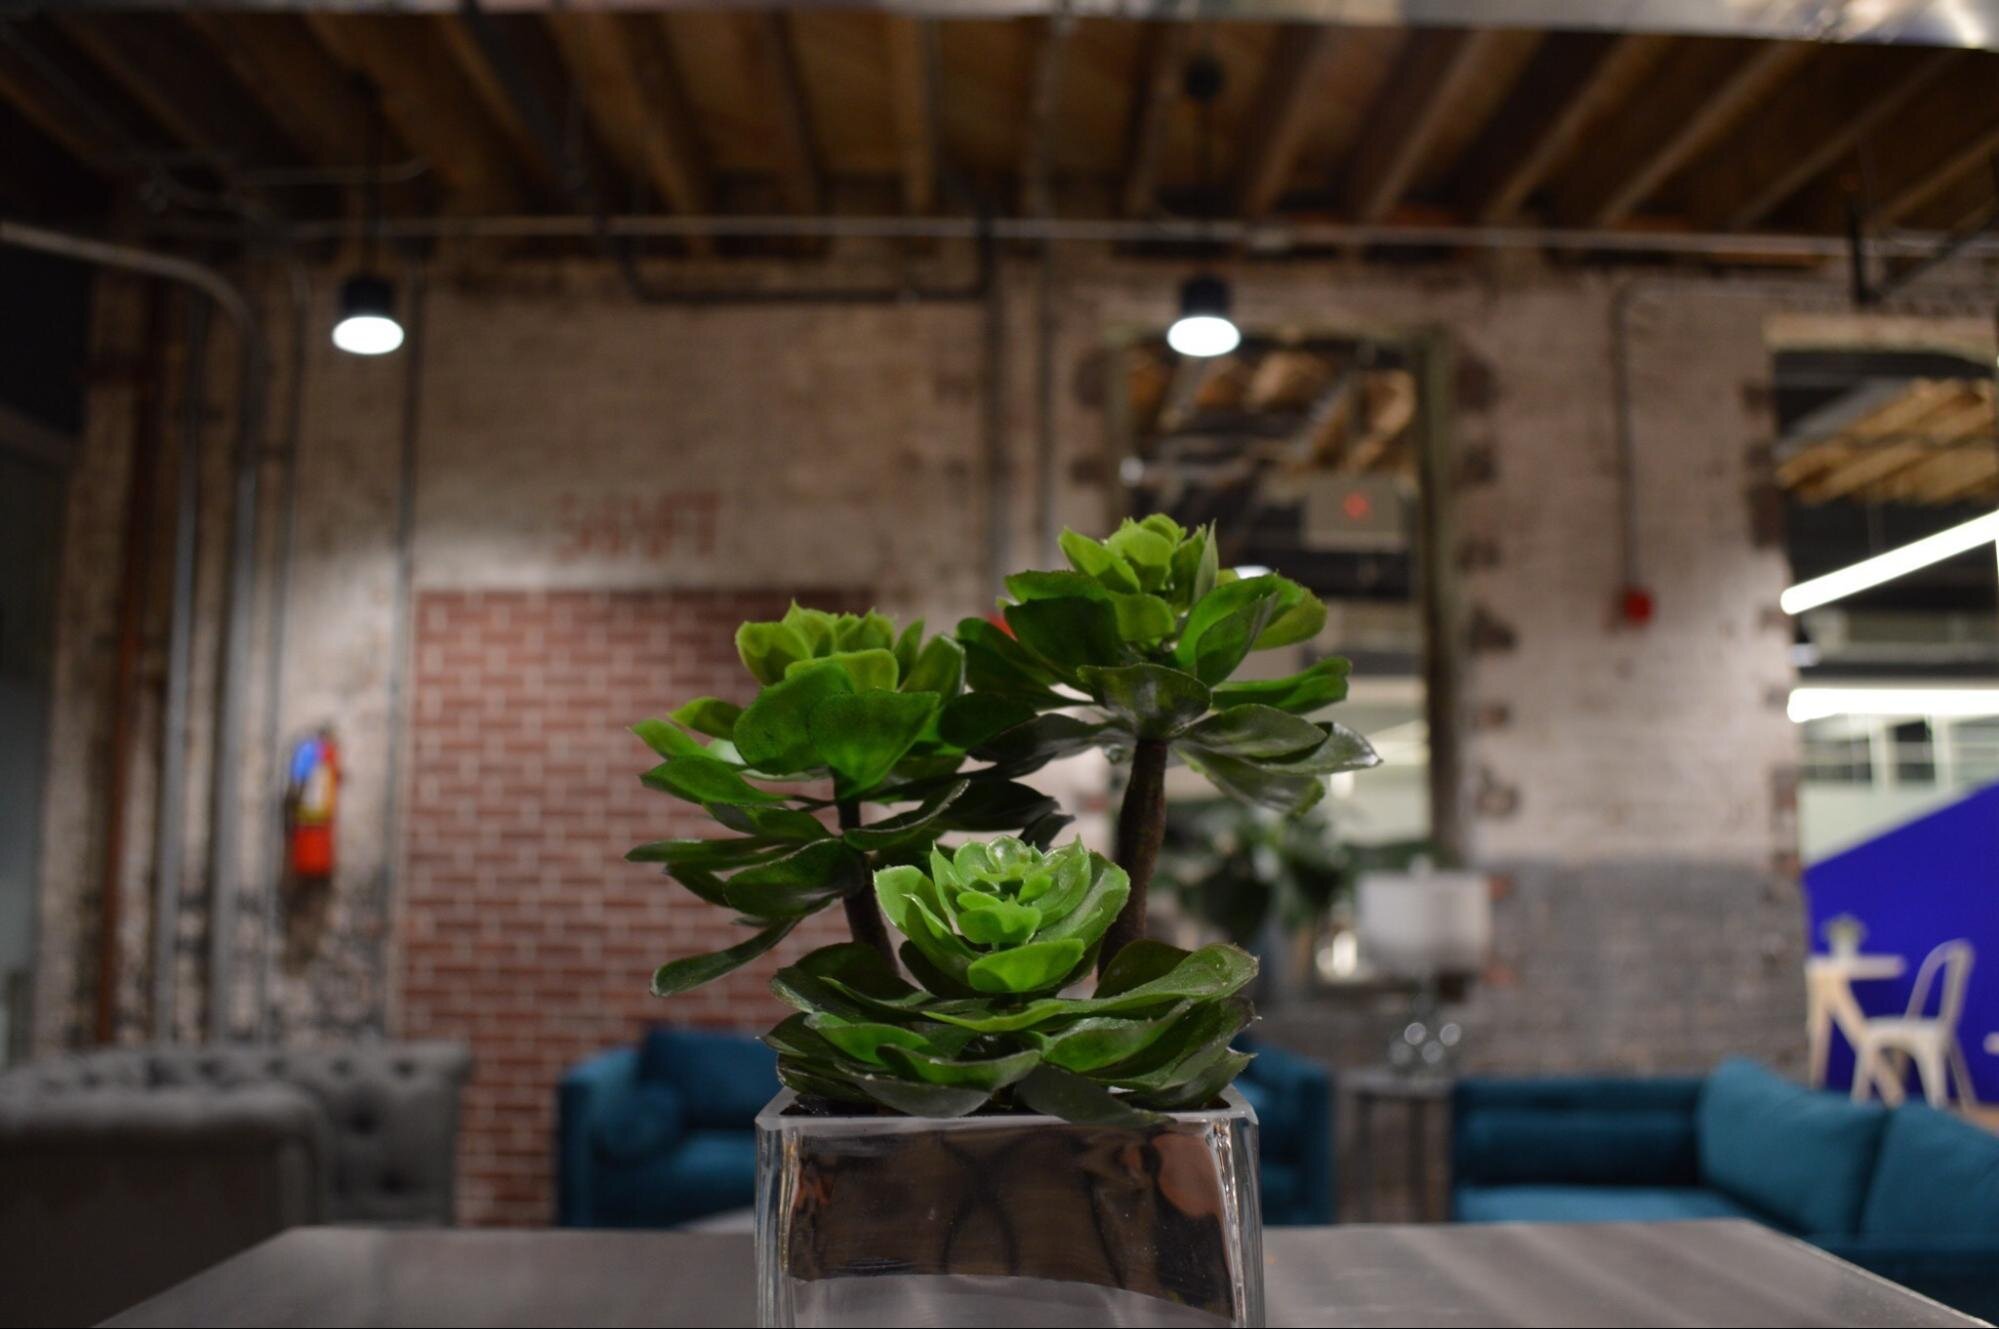 Plant on a table in an industrial-looking workspace